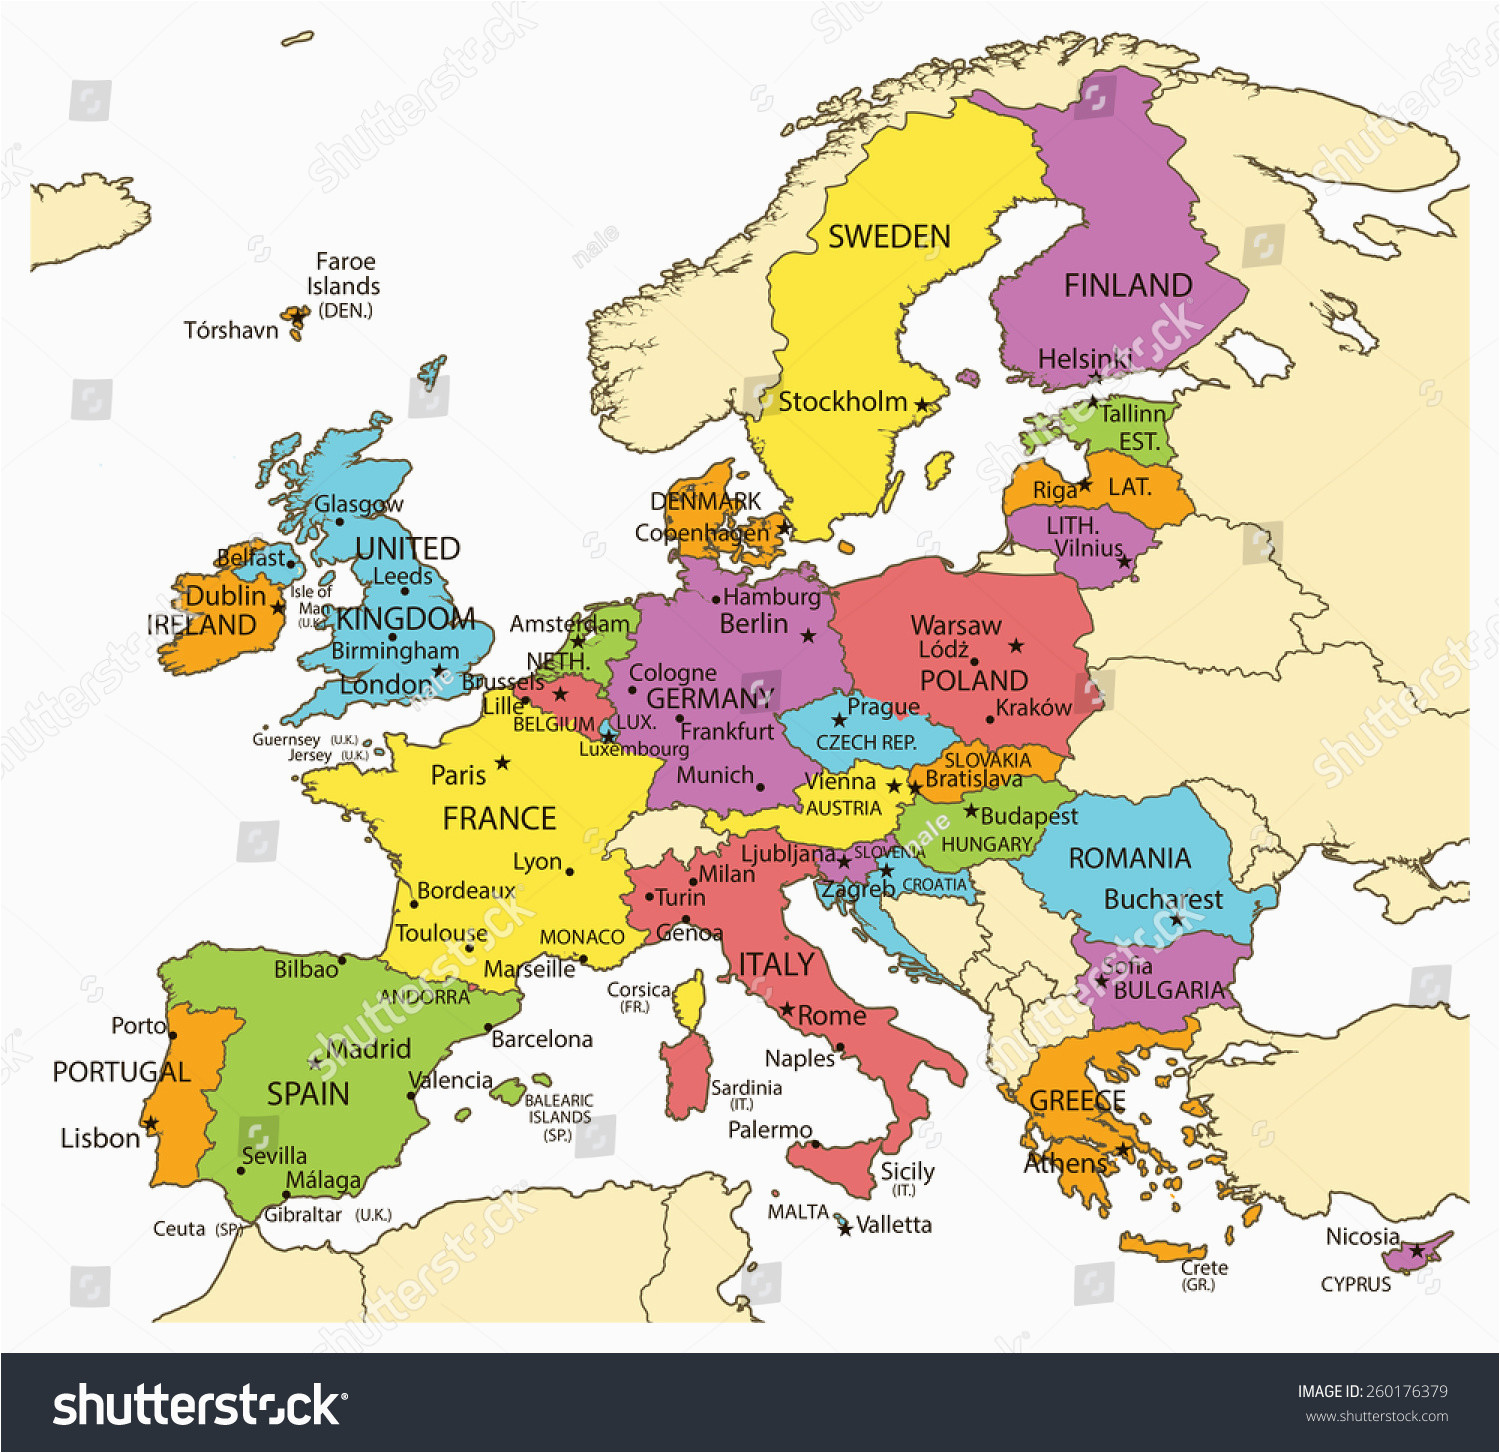 Map Of Europe With Country Names And Capitals Secretm - vrogue.co